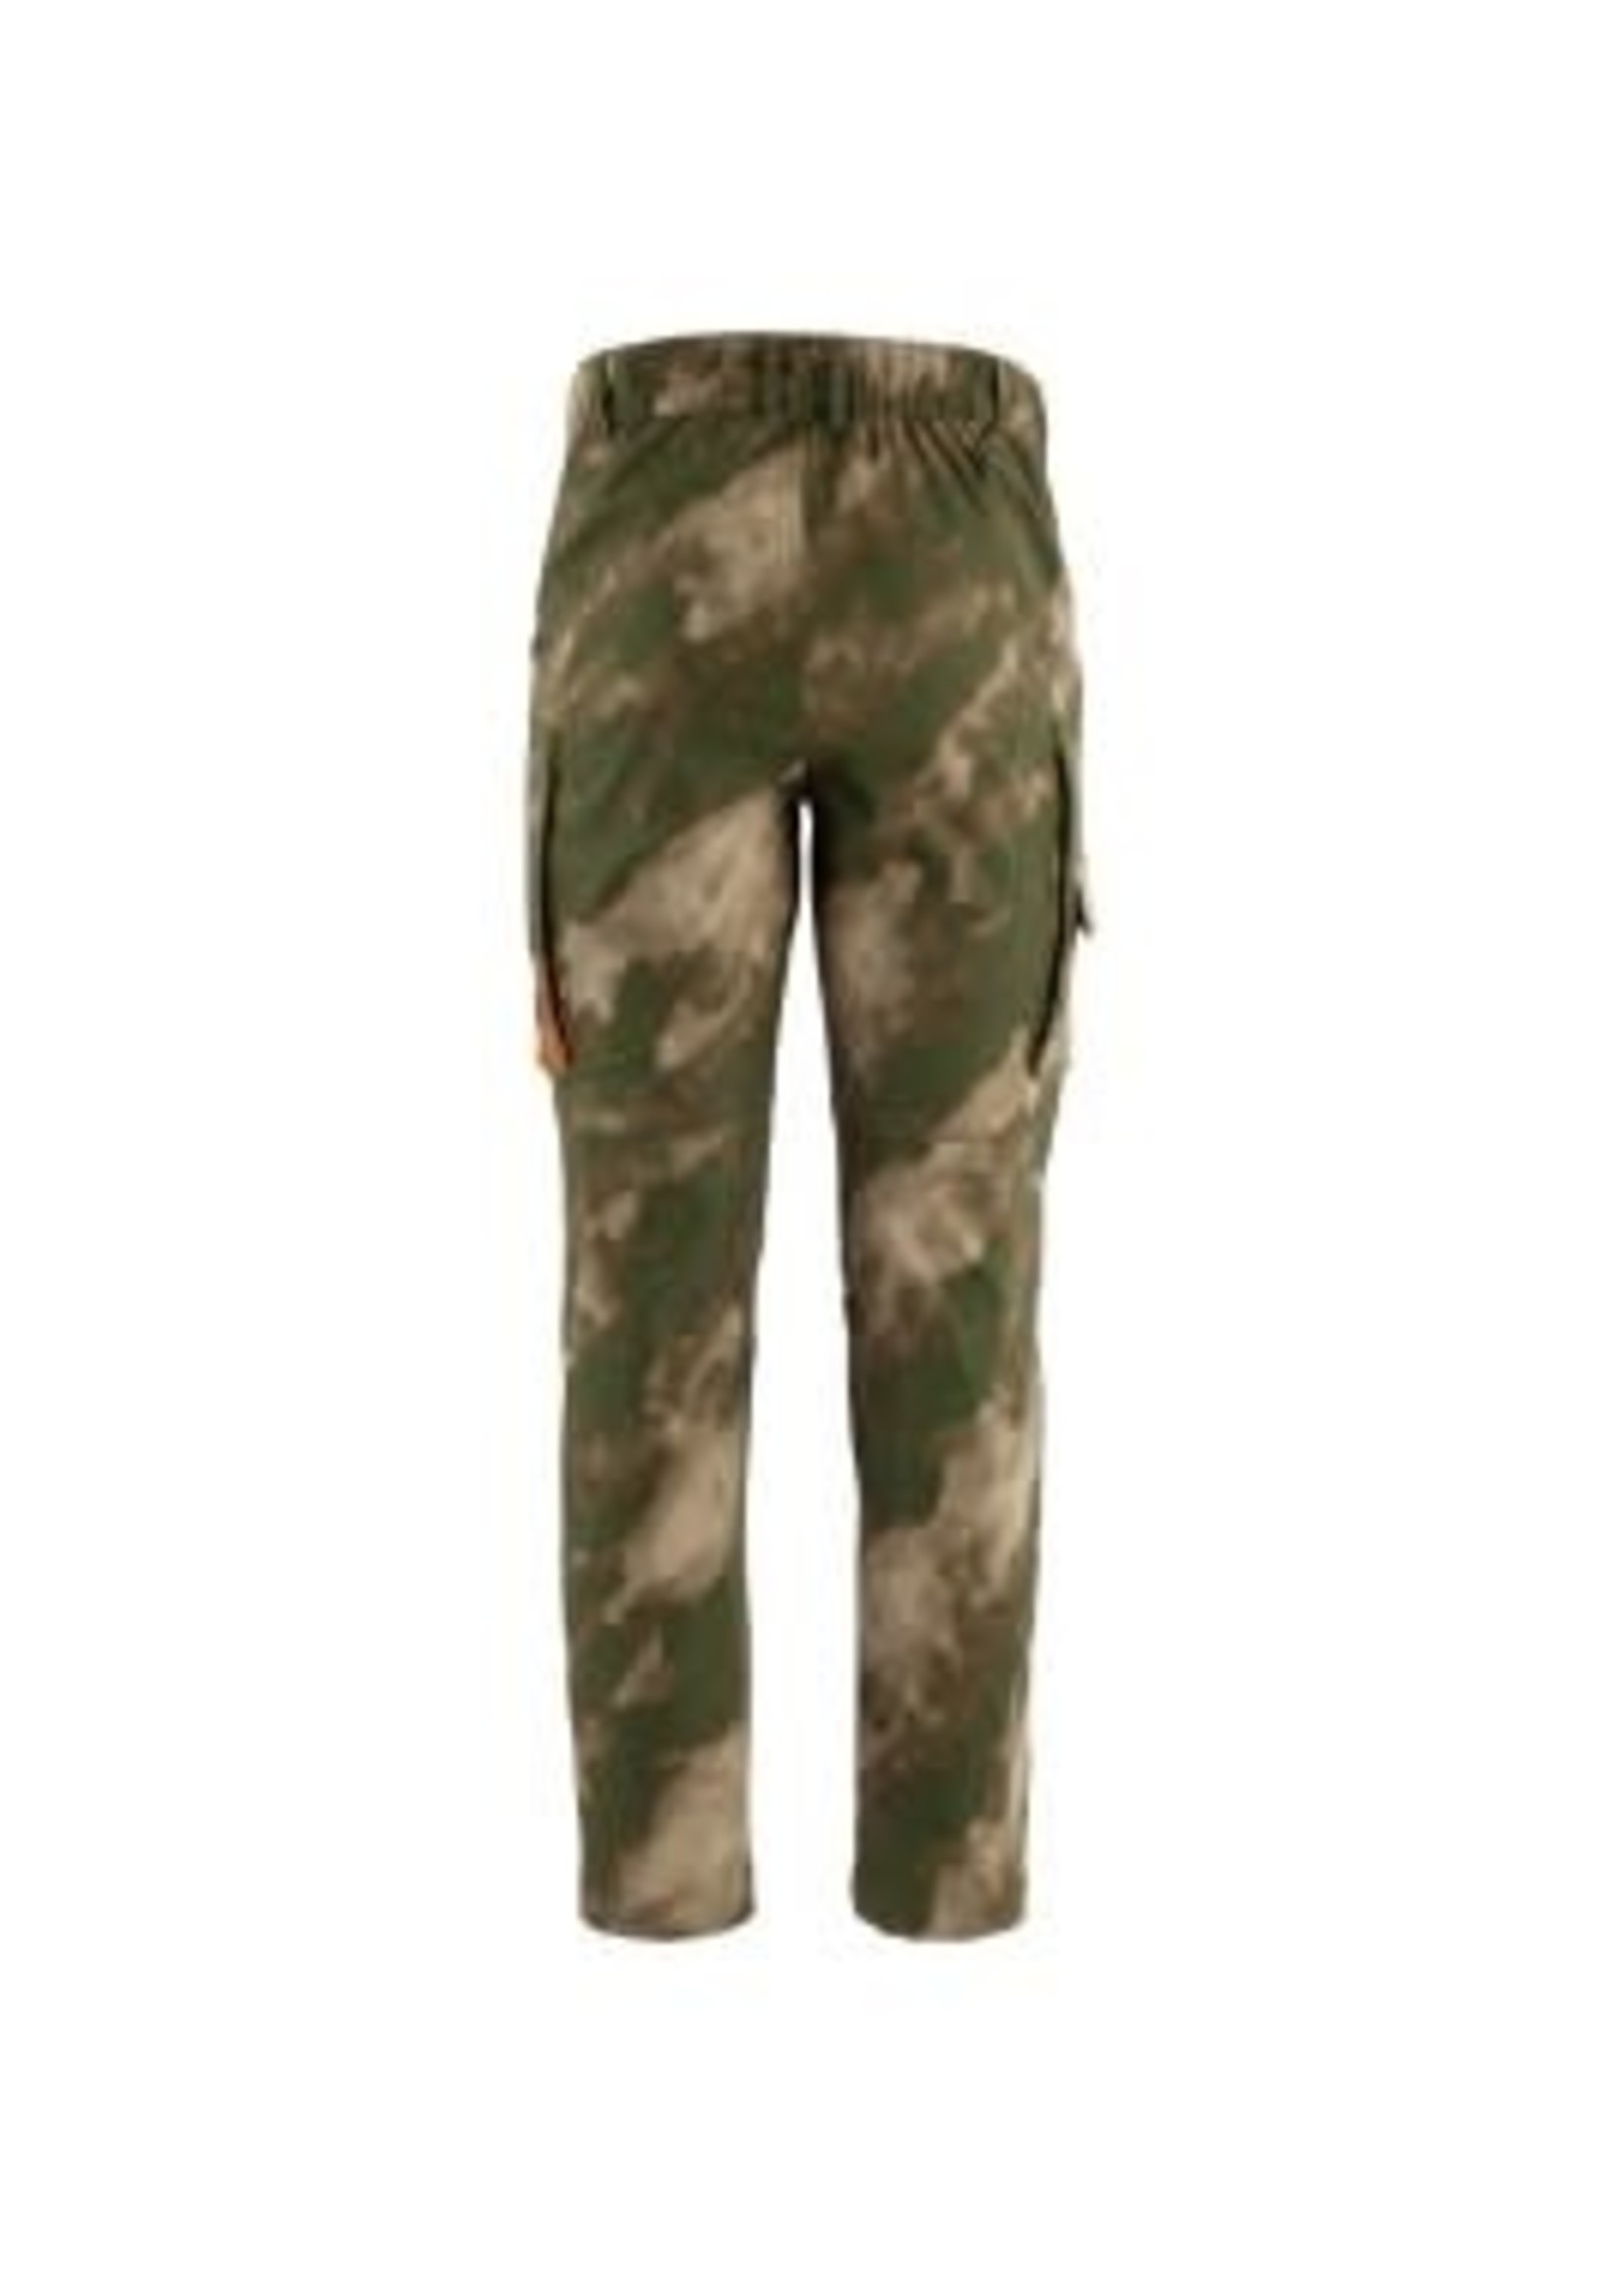 Connec Outdoor BIOME PANTS